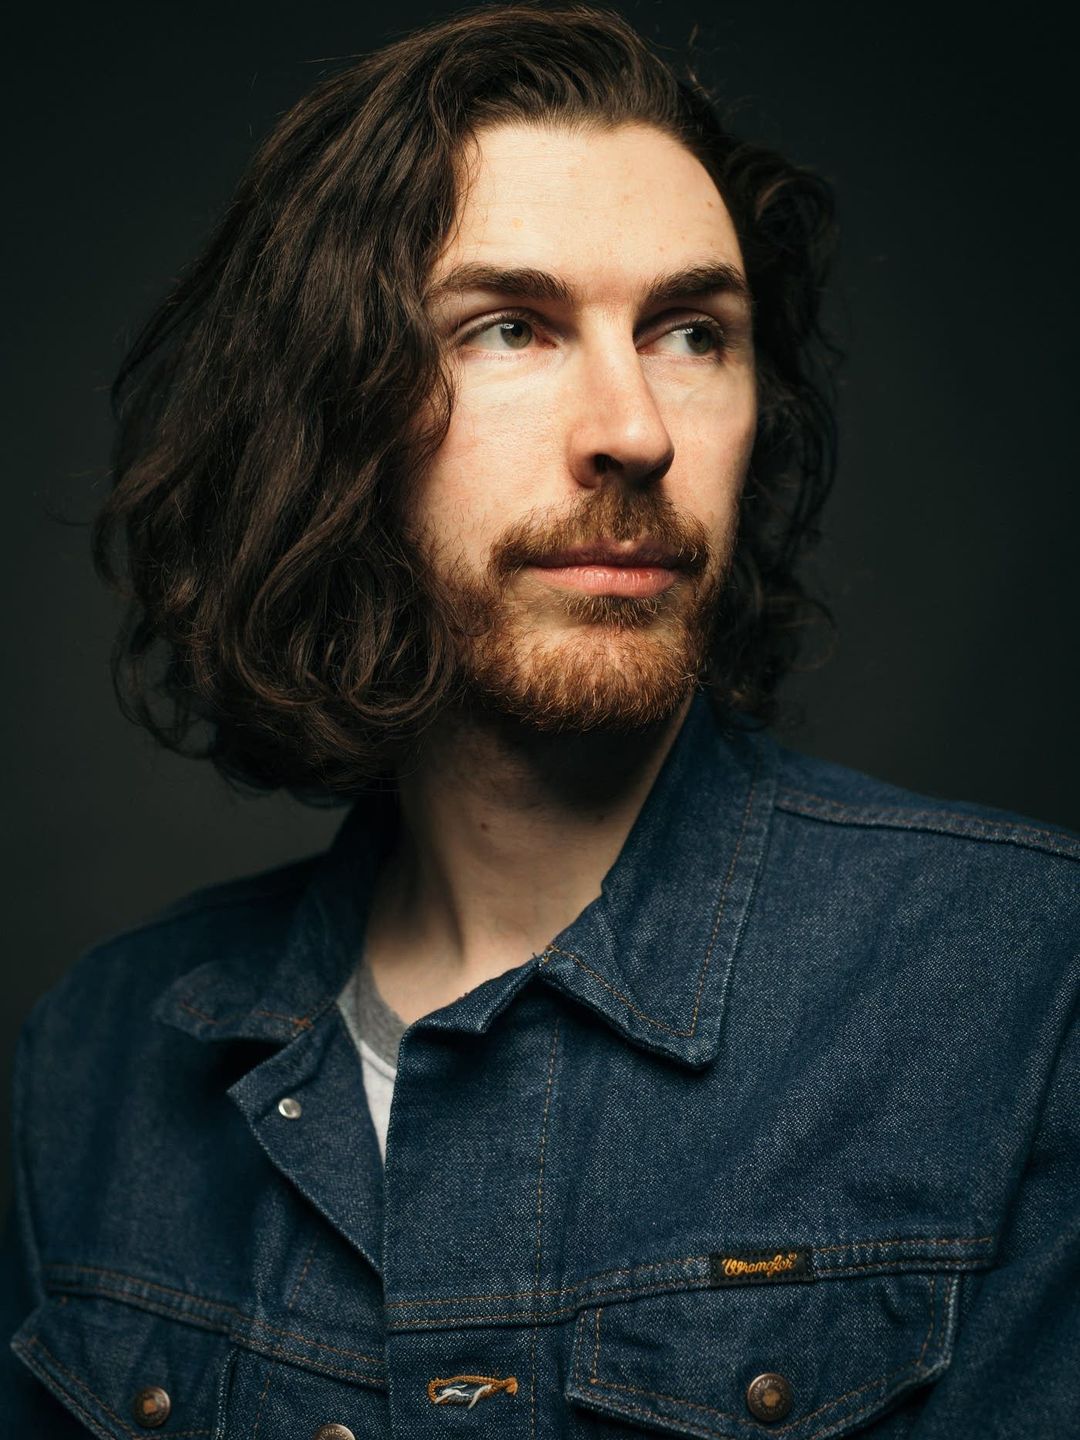 Hozier in real life